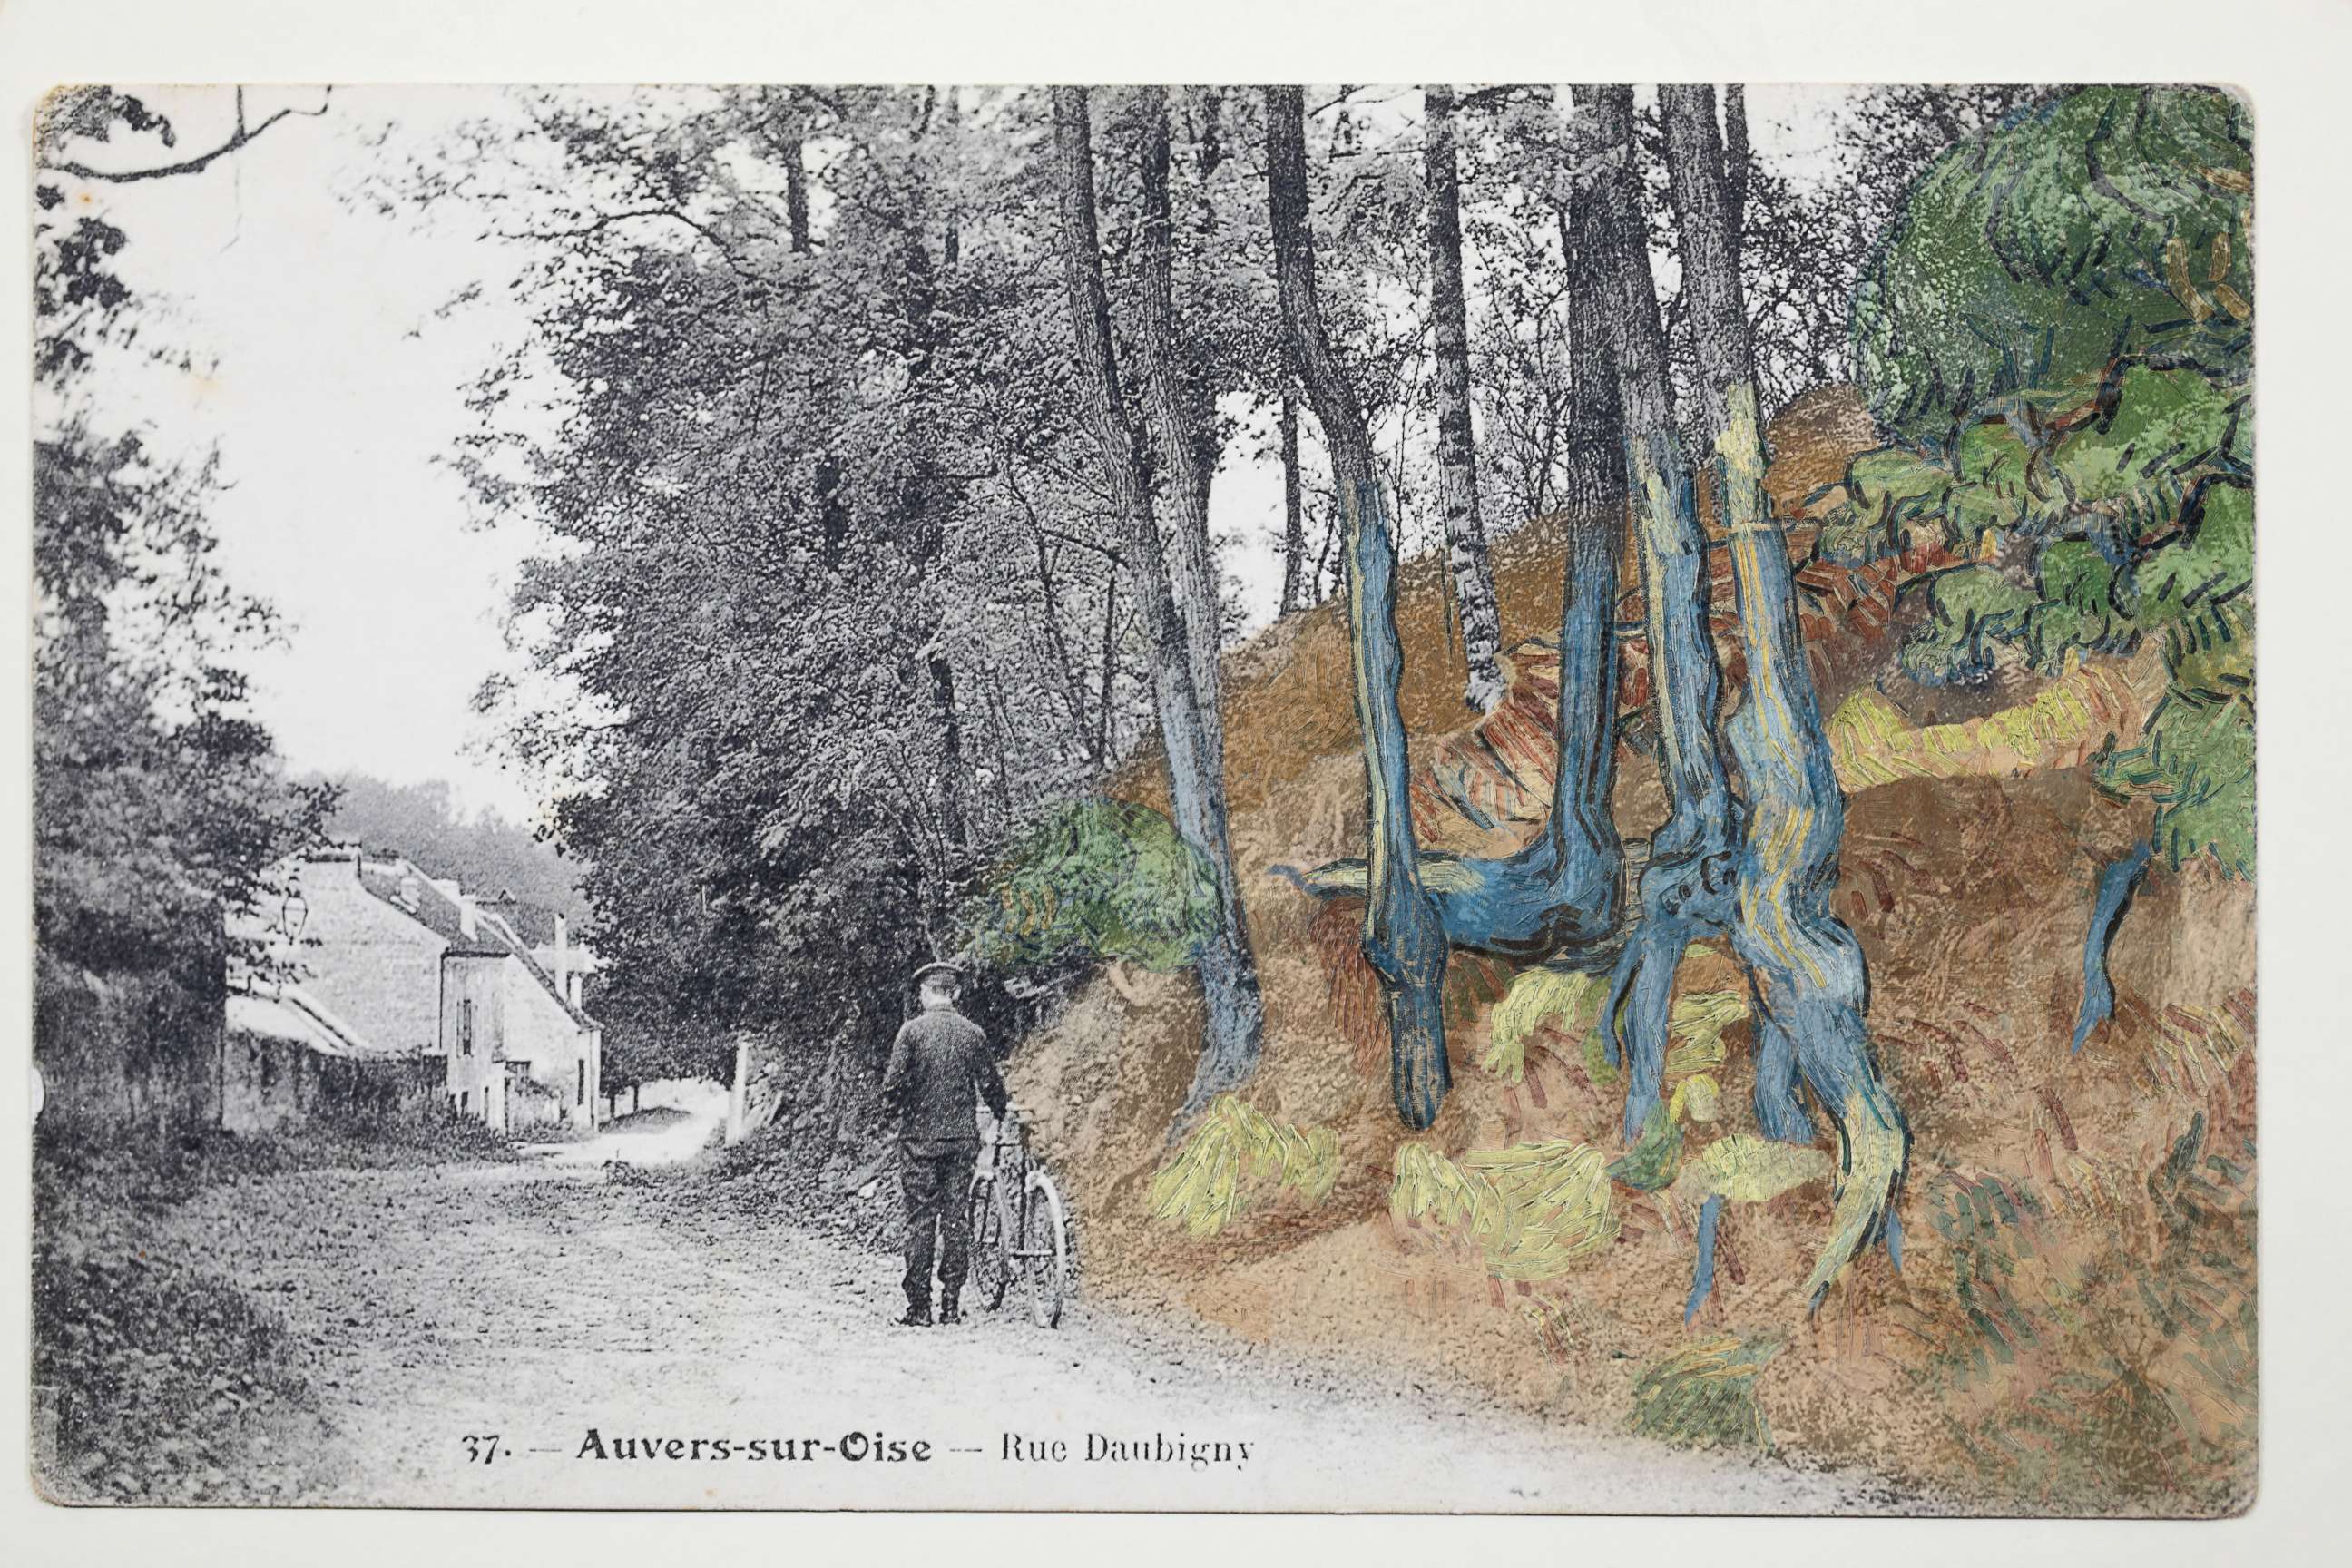 PHOTO: A handout photo made available by Arthenon, July 29, 2020 shows a colorized version of the postcard that led French researcher of the Van Gogh Institute, Wouter van der Veen to the likely location where Van Gogh painted "Racines" (Tree roots).